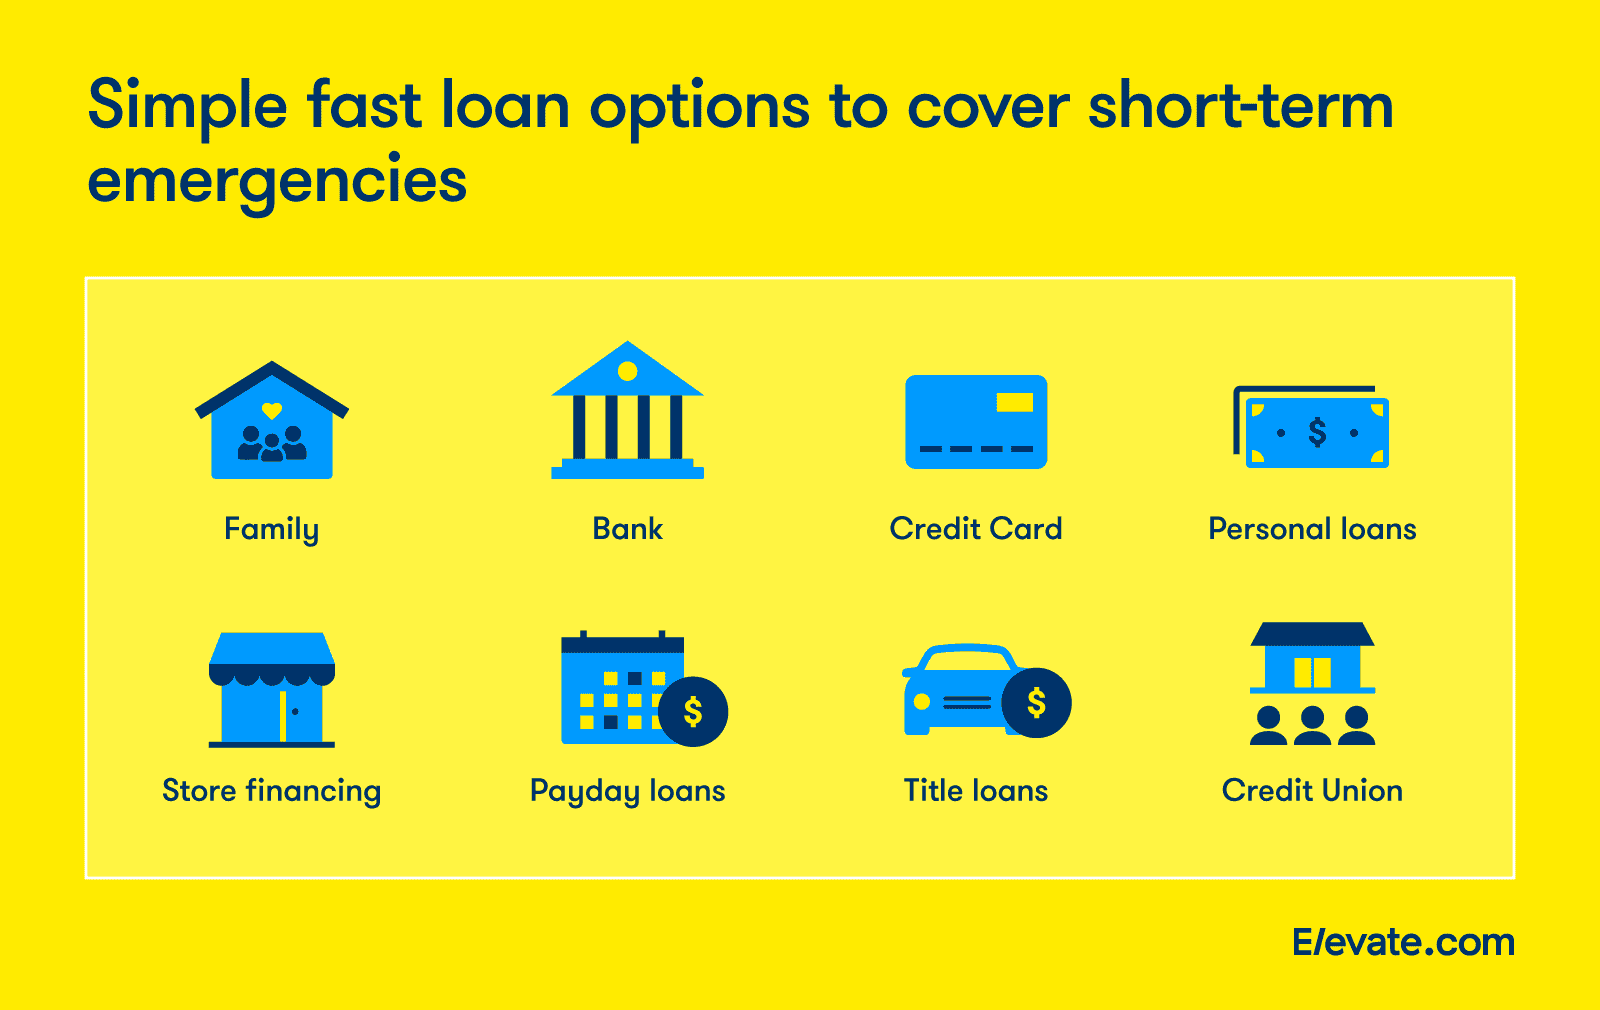 Simple fast loan options to cover short-term emergencies.  Family, Bank, Credit Card, Personal Loan, Store Financing, Payday Loans, Title Loans, Credit Union